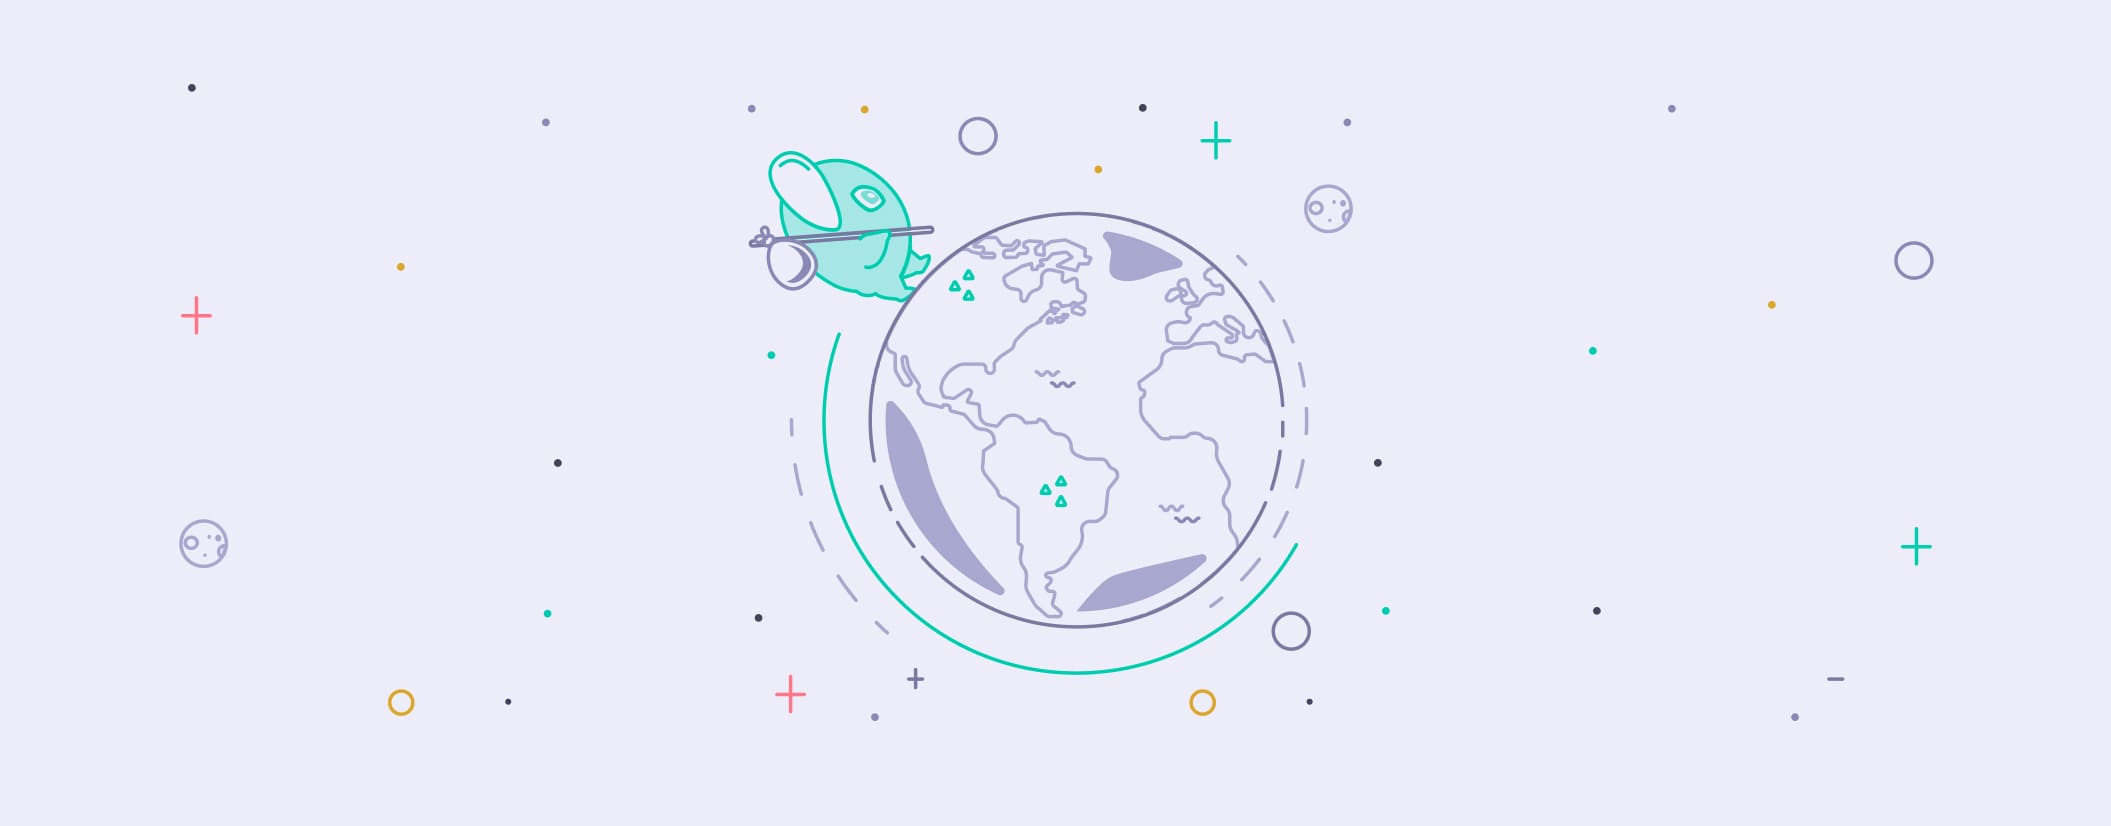 Remote working and flexibility illustration of tyk mascot around the world